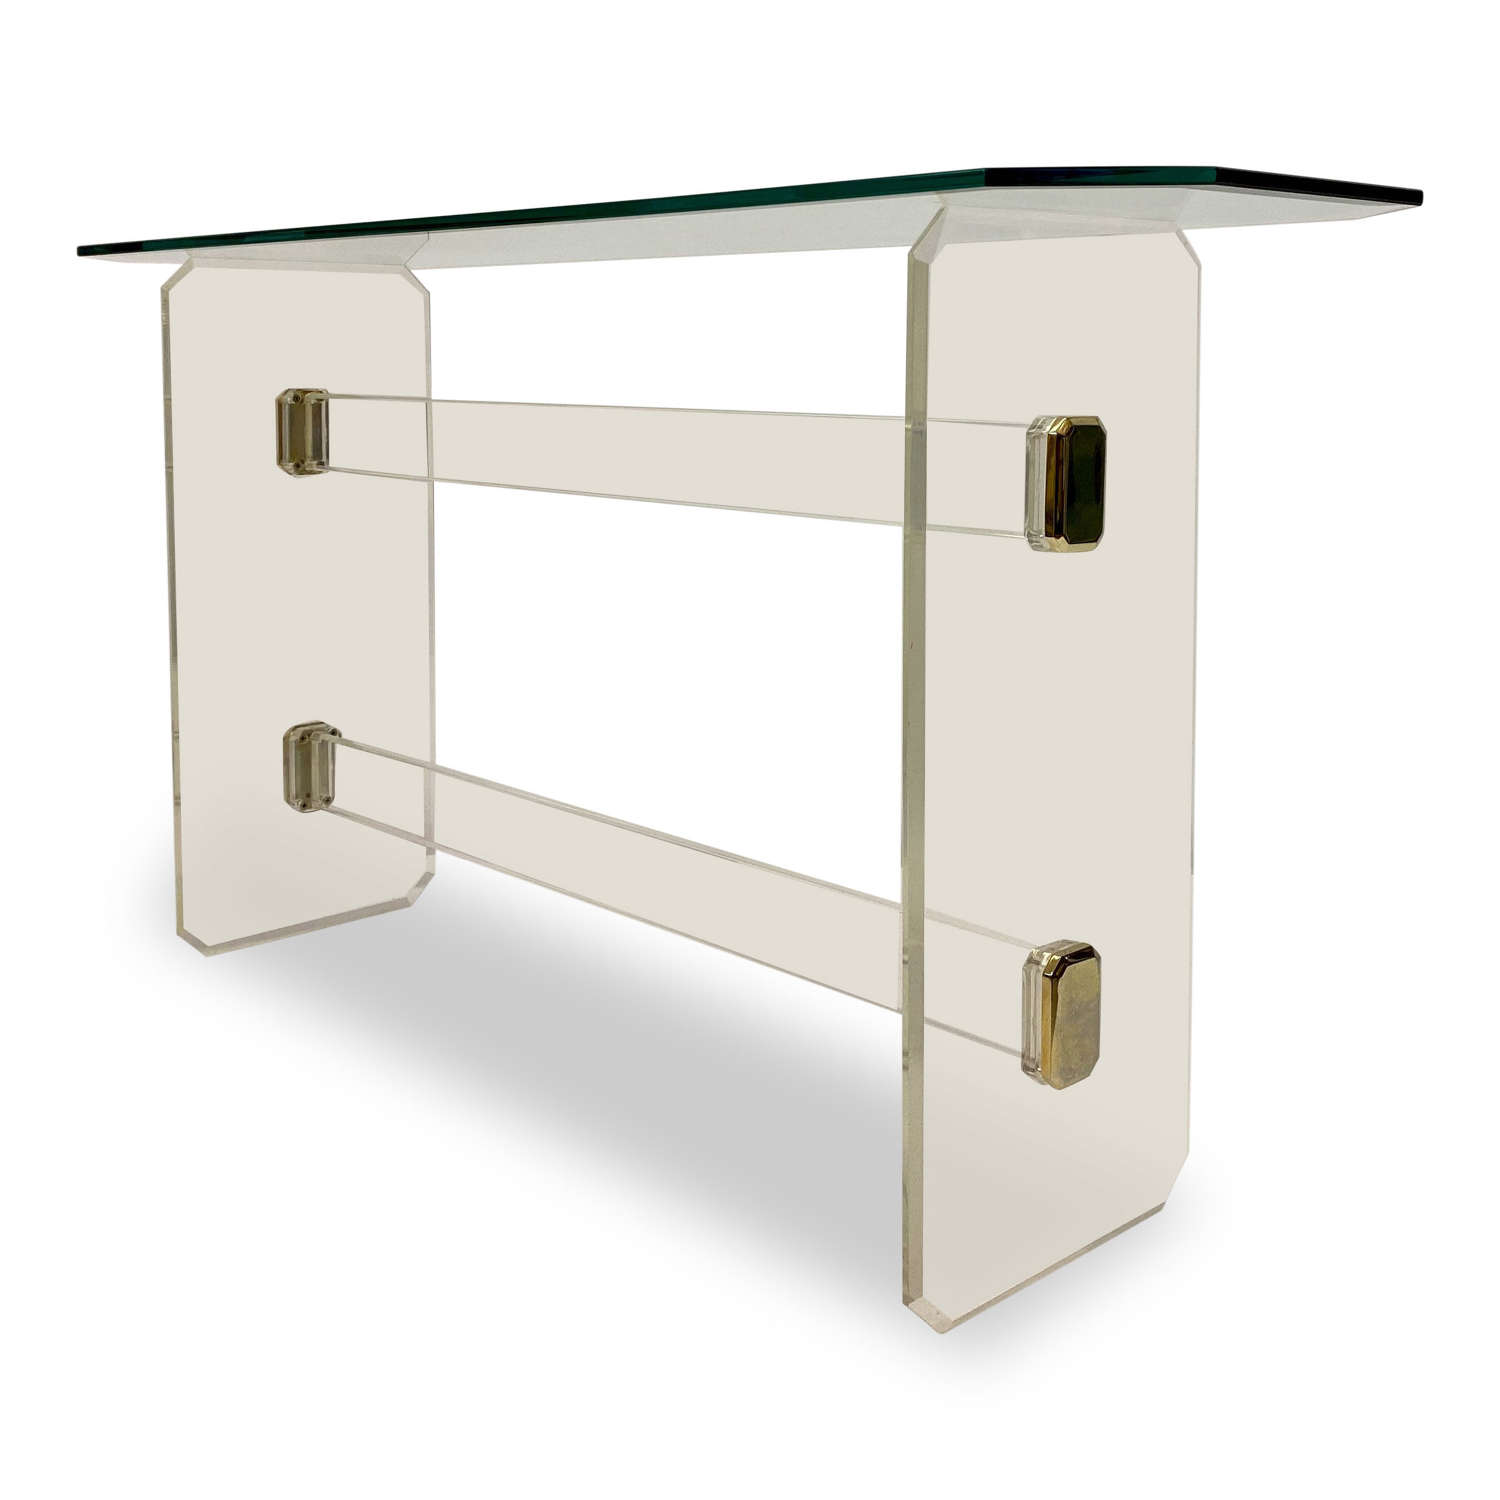 1980s French Lucite And Brass Console Table